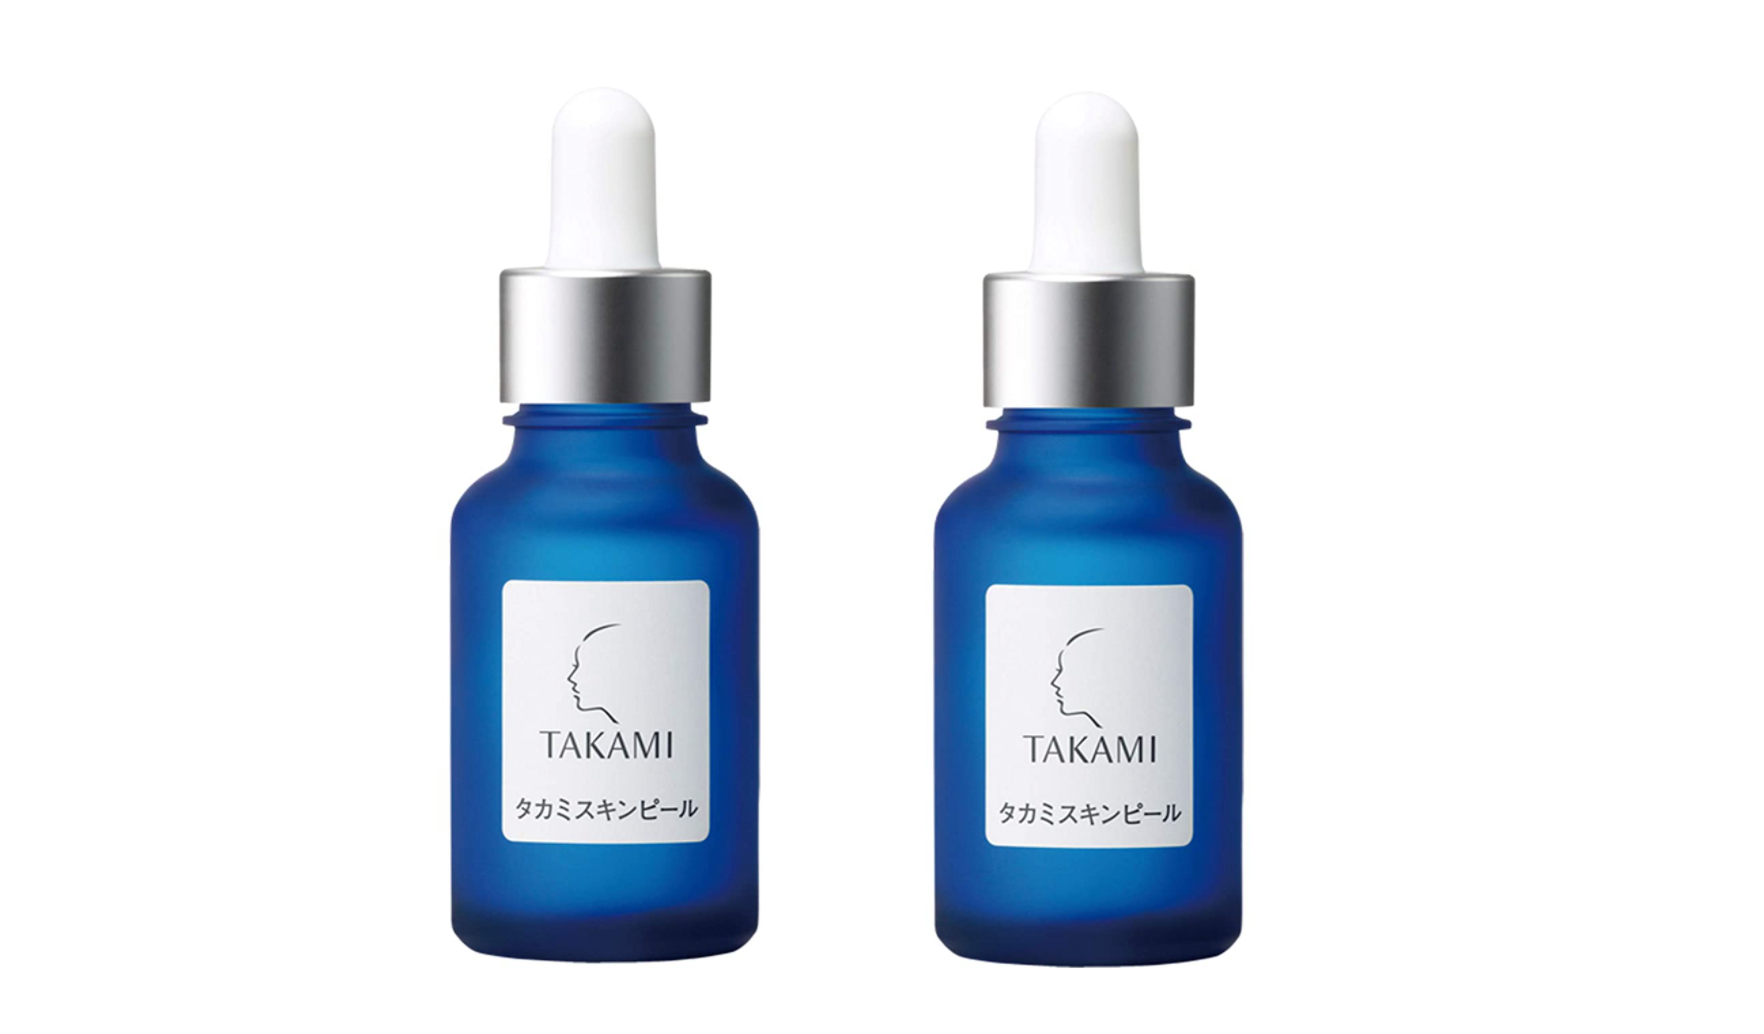 Takami's iconic product is the Skin Peel.